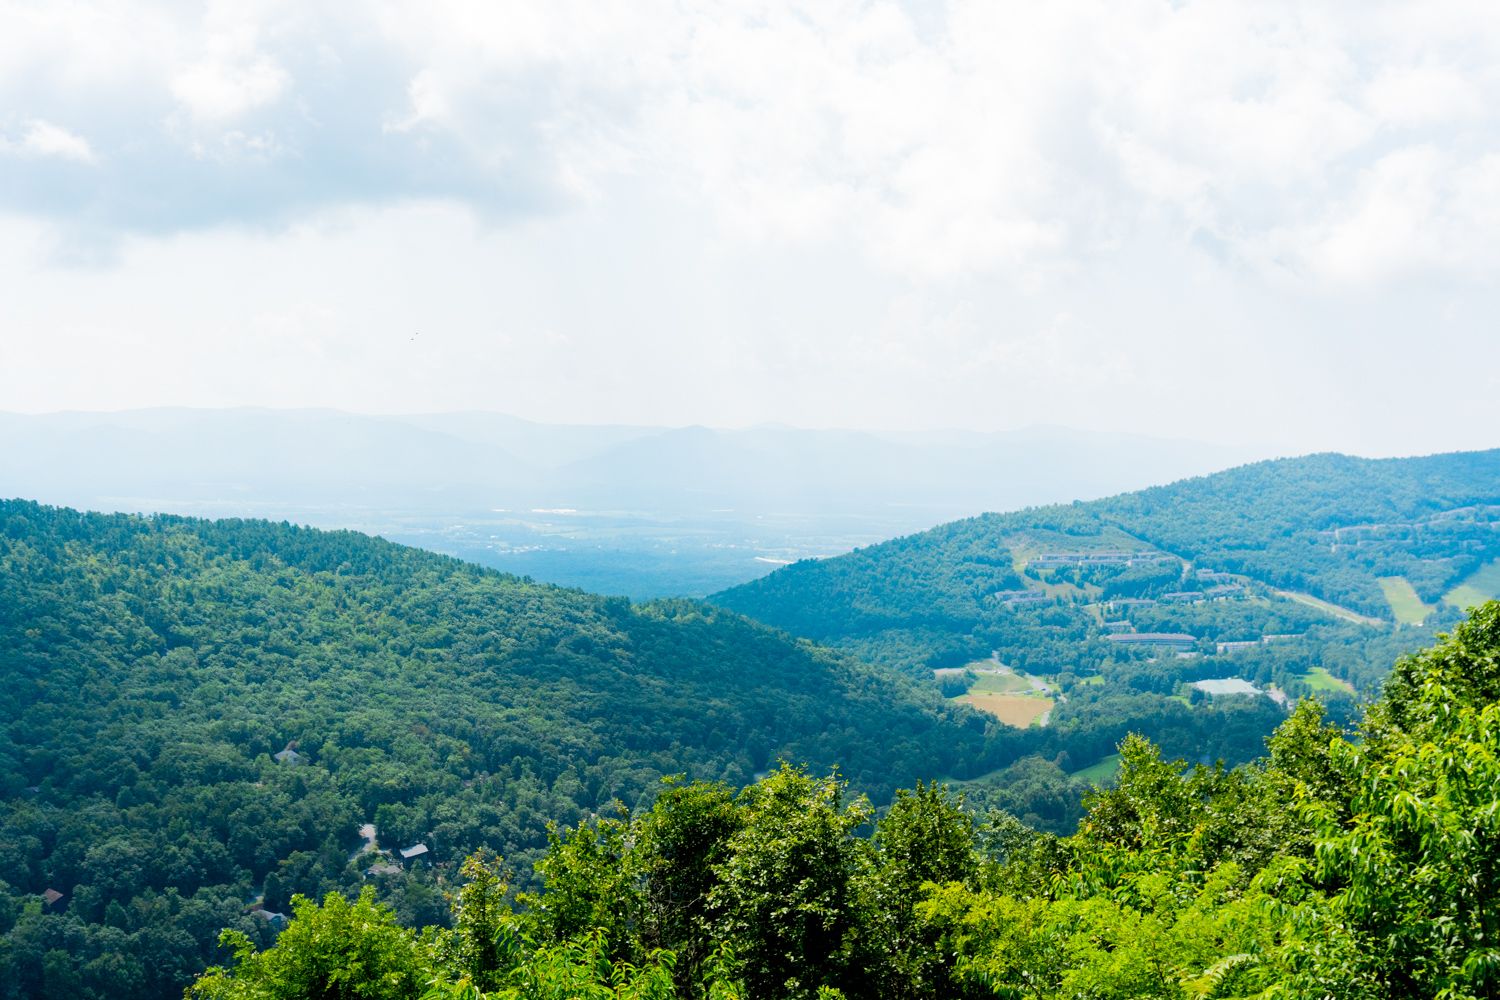 A view from Skyline Drive of the Blue Ridge Mountains in Virginia